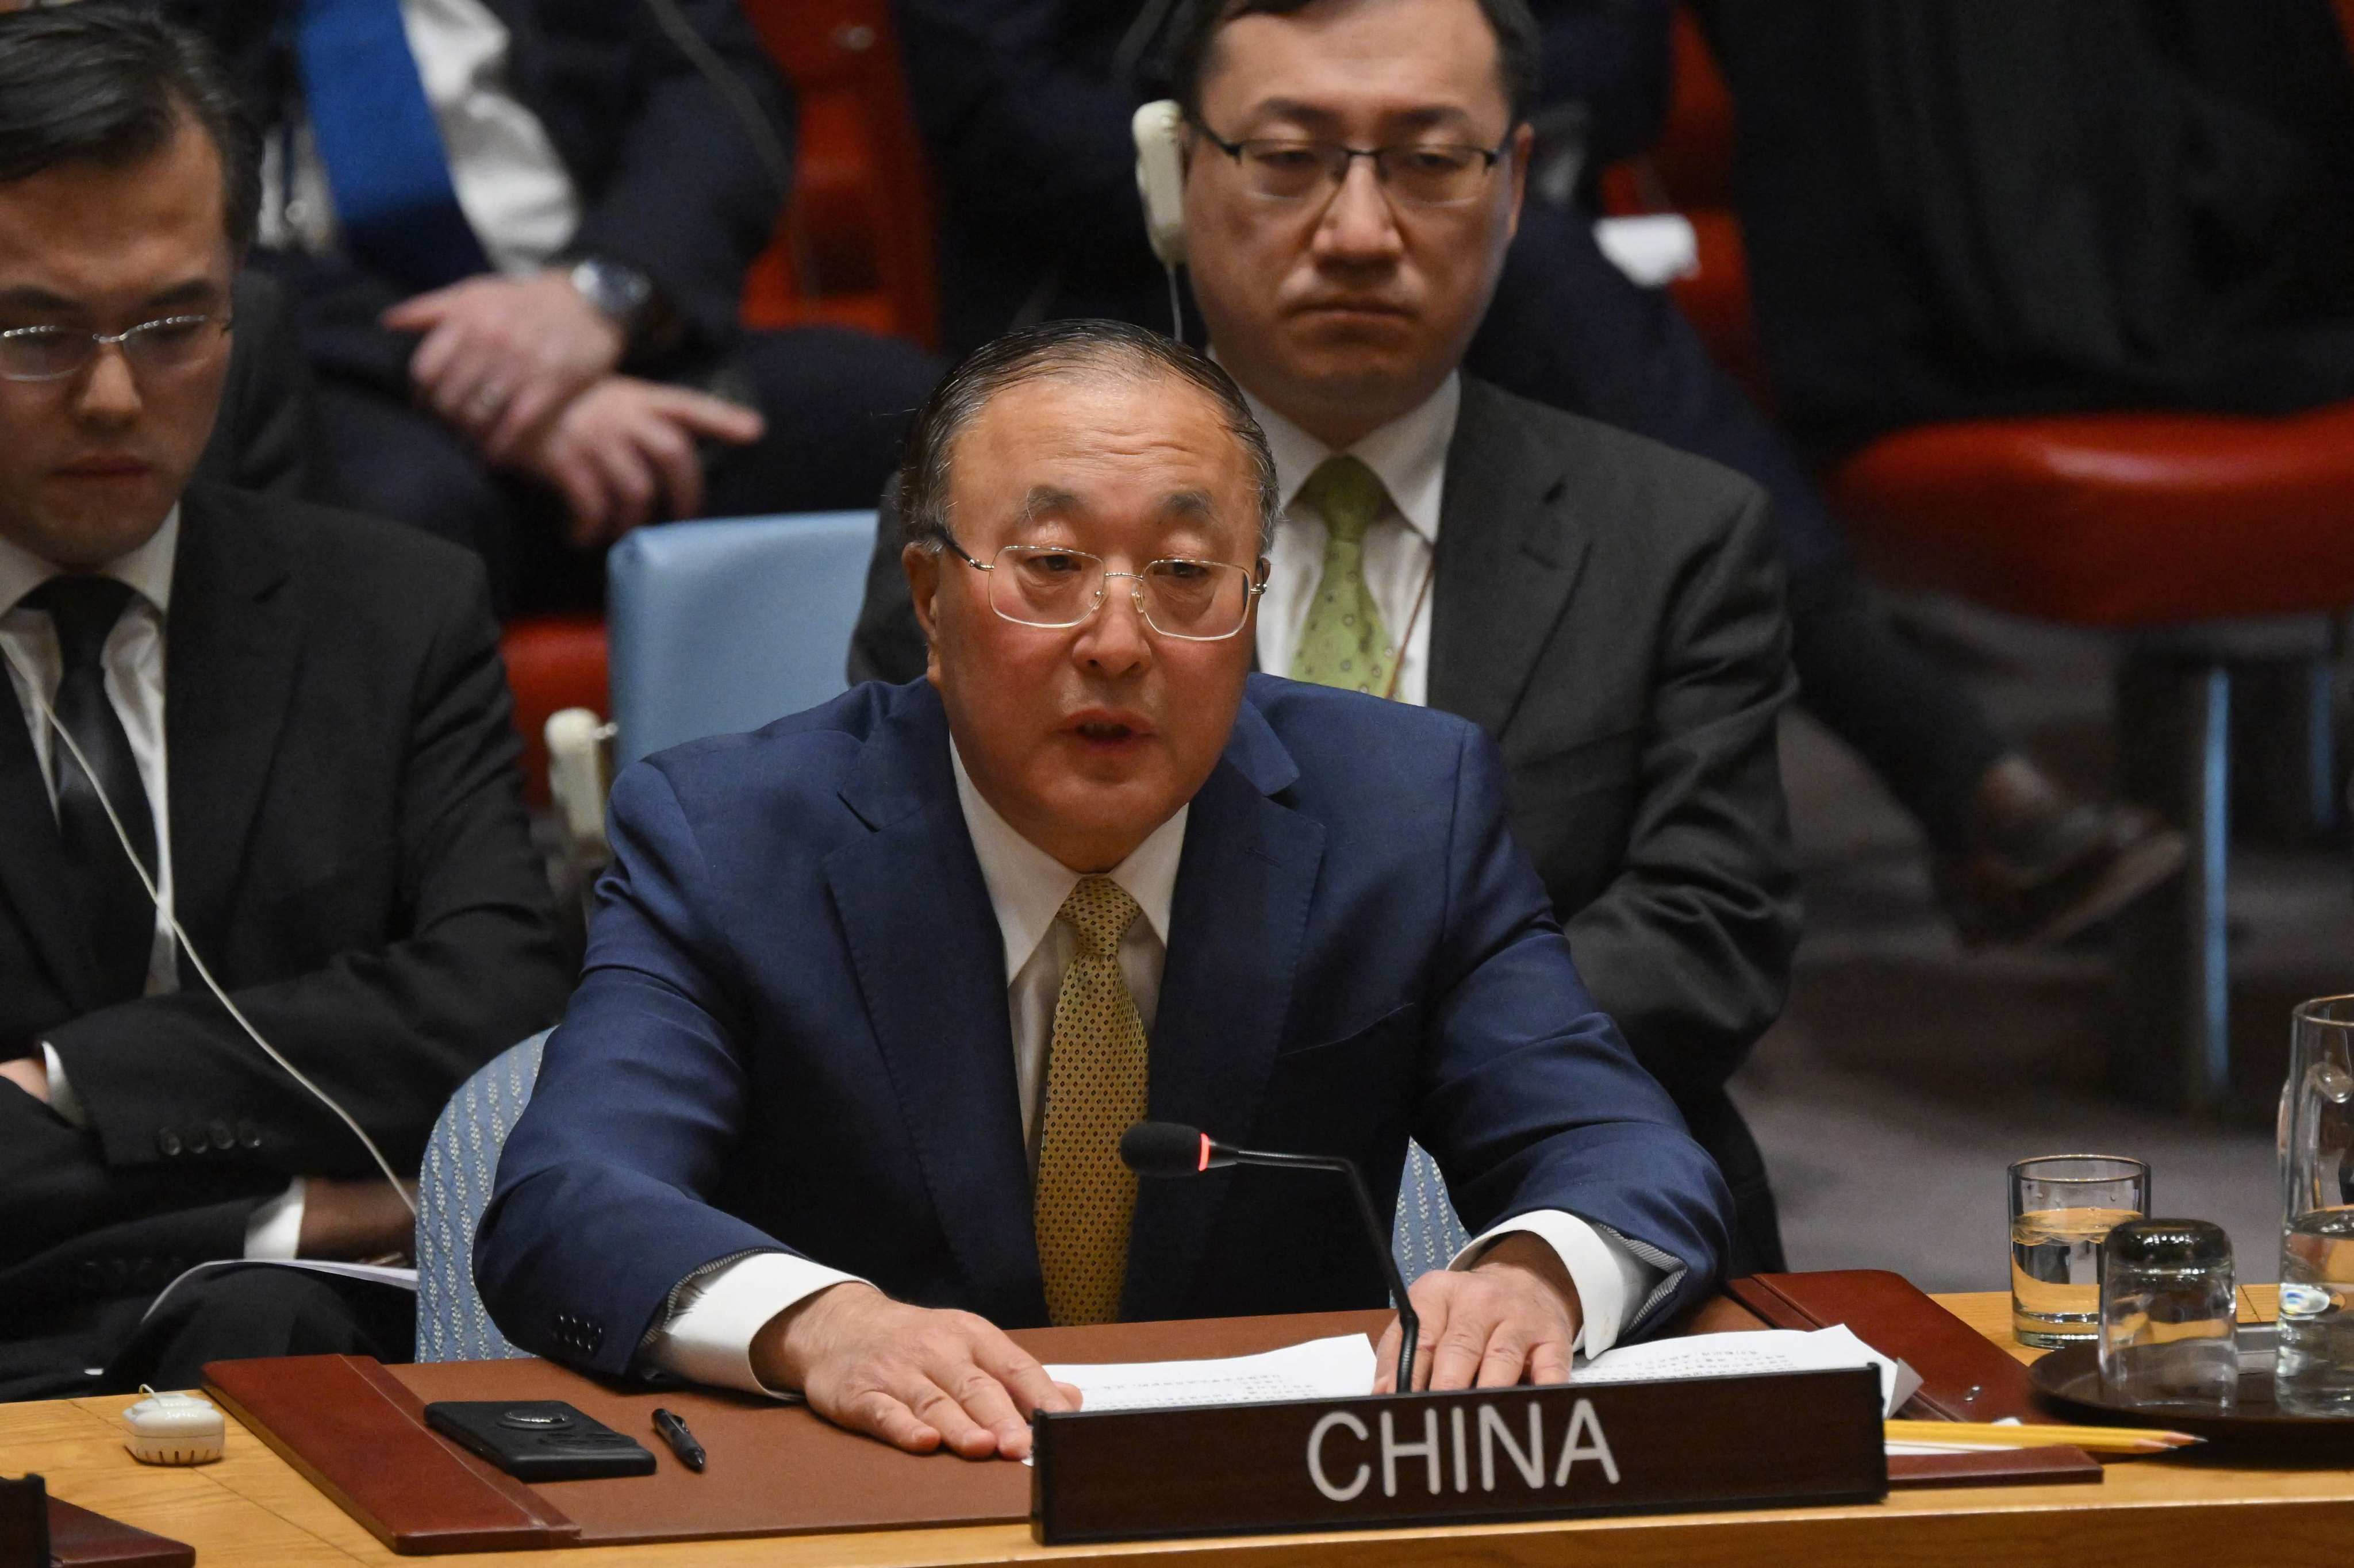 China’s UN ambassador Zhang Jun speaks during a UN Security Council vote on a Gaza ceasefire and hostage deal at UN headquarters in New York on Friday. Photo: AFP